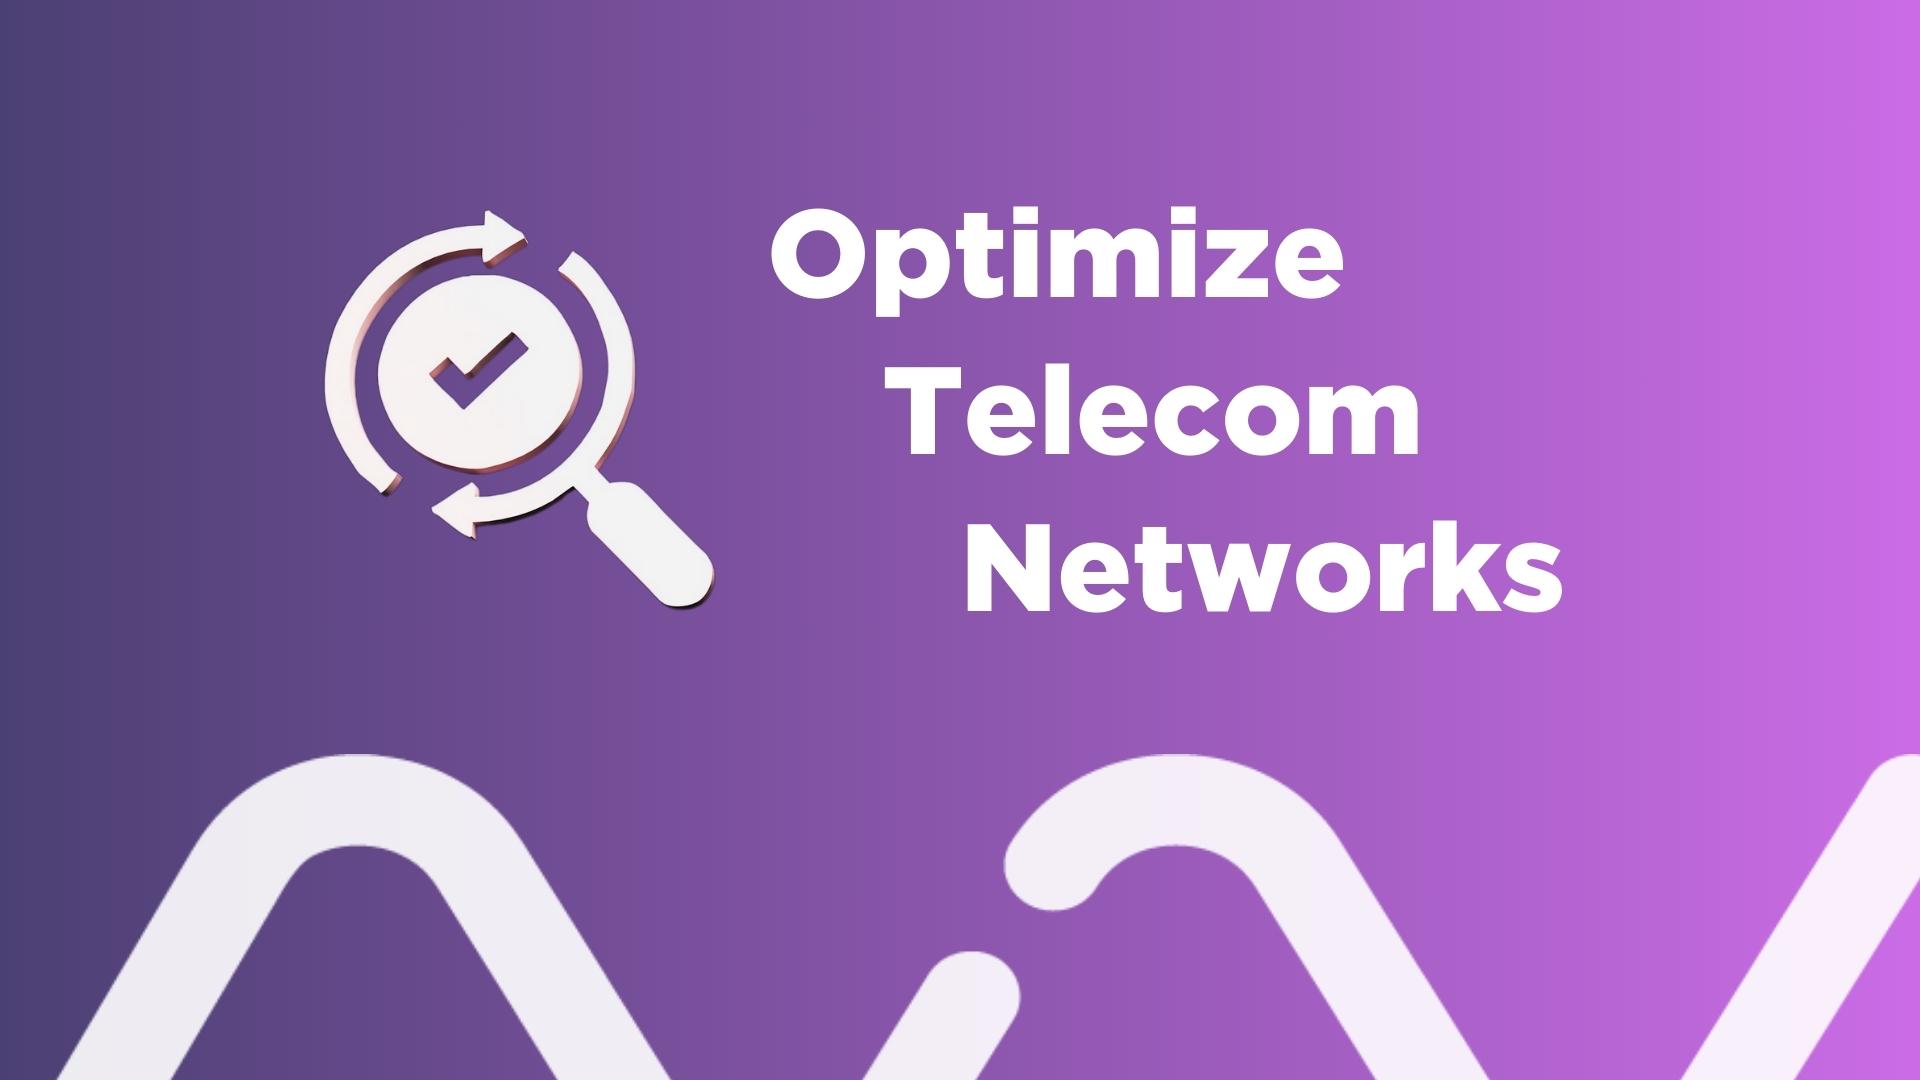 Innovile-telecommunication-solutions-smart-services-what-is-network Optimization-in-telecom-optimize Telecom Networks